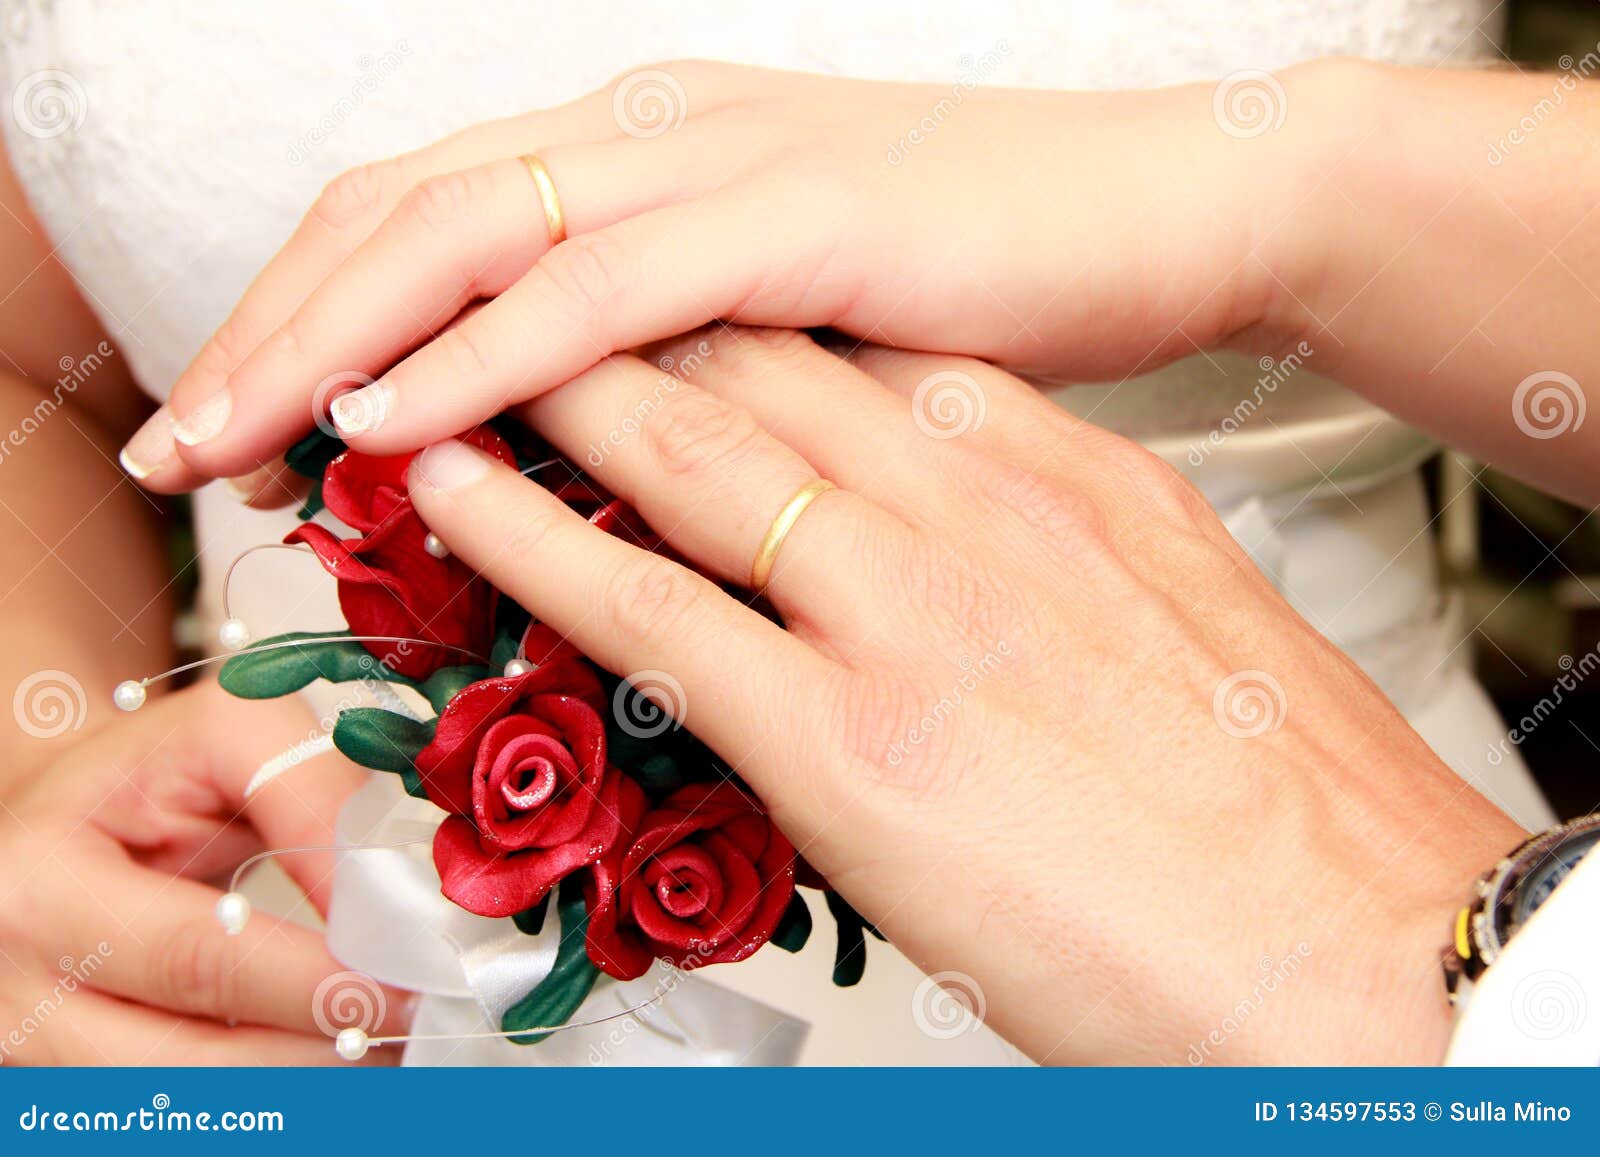 wedding buque with beautiful red flowers and pearls